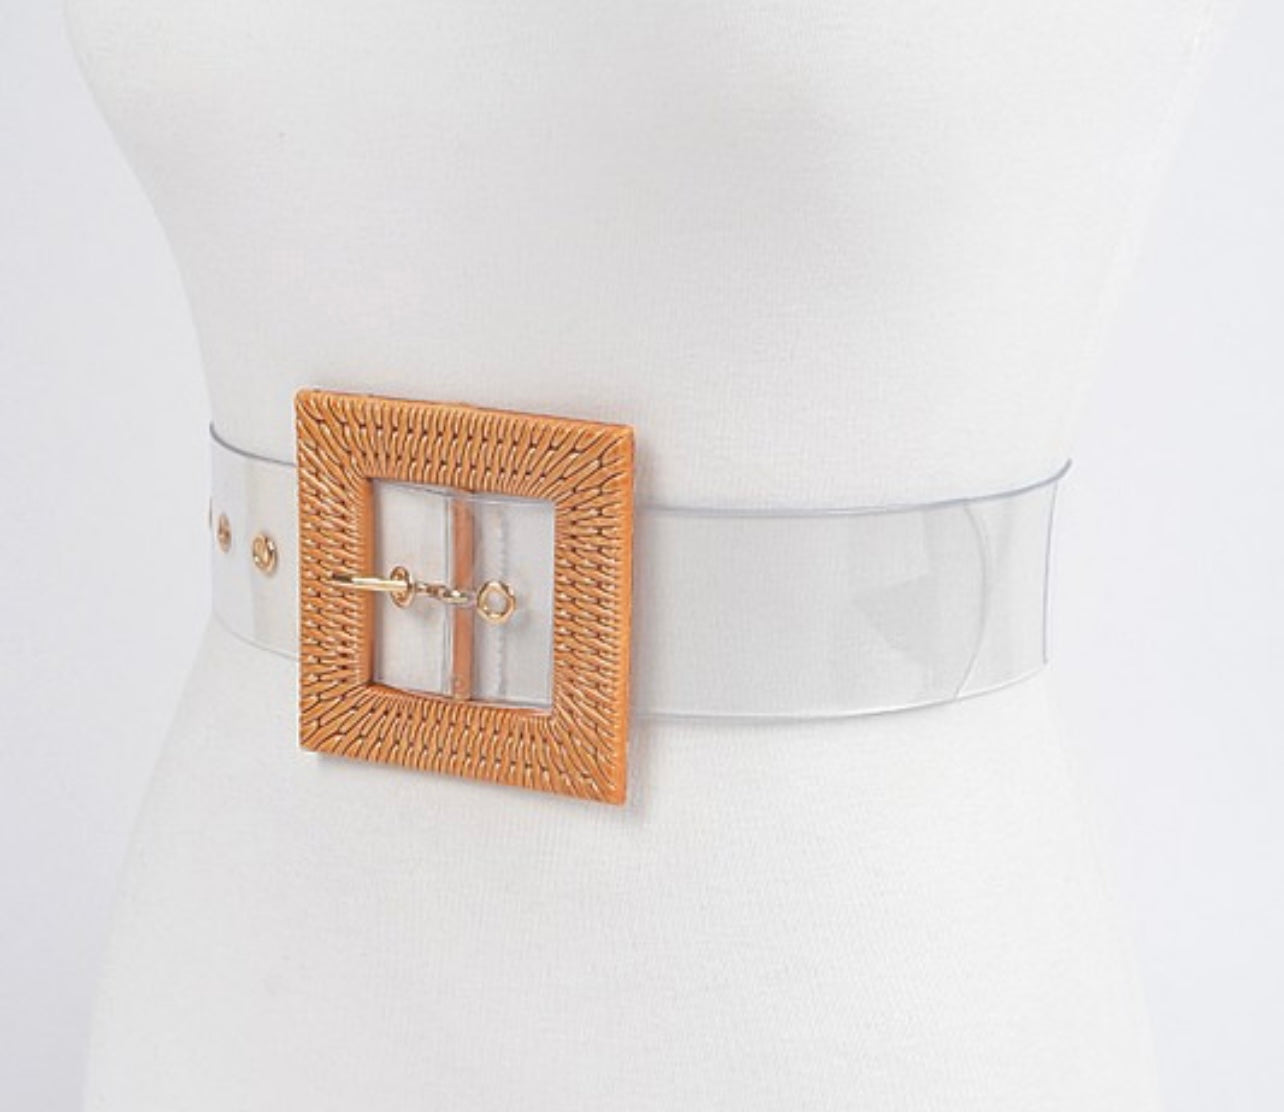 CLEAR SQUARE BAMBOO BUCKLE BELT